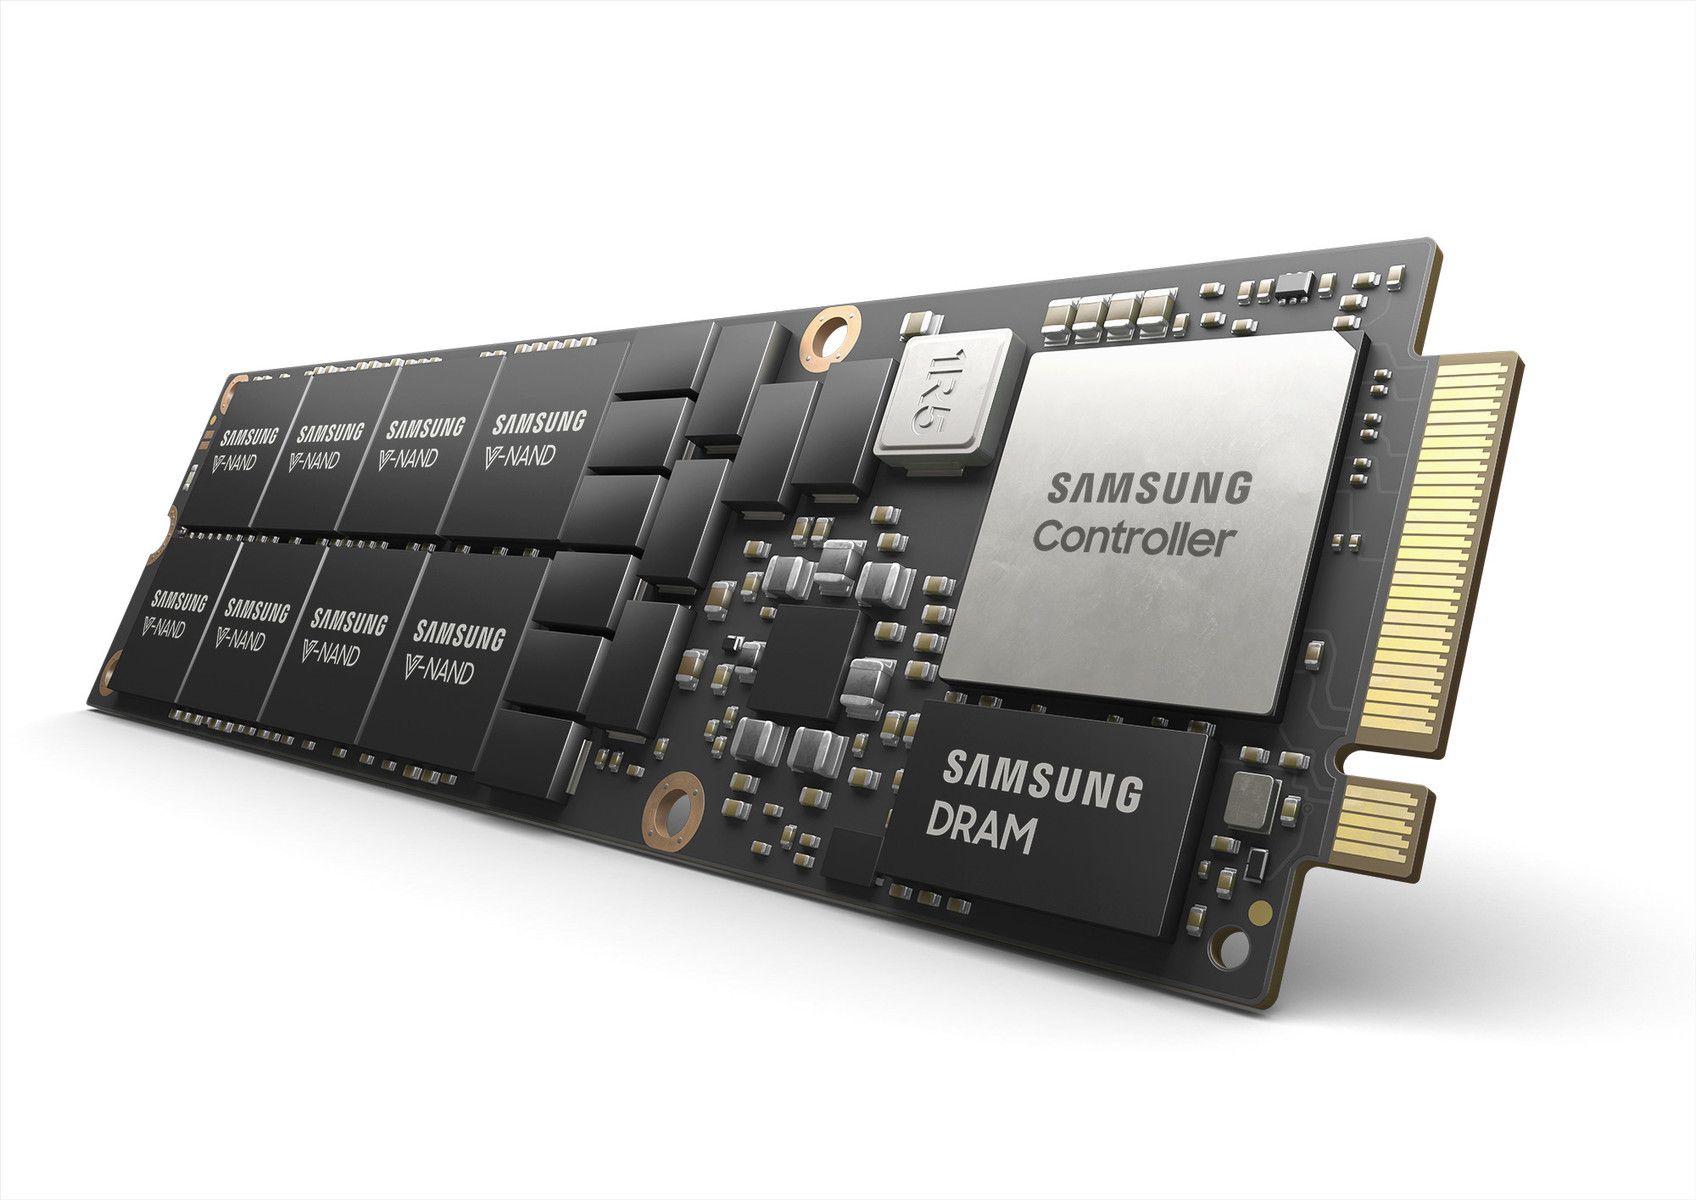 NF1 SSD: Samsung Introduces 8TB NVMe SSD for Data Centers